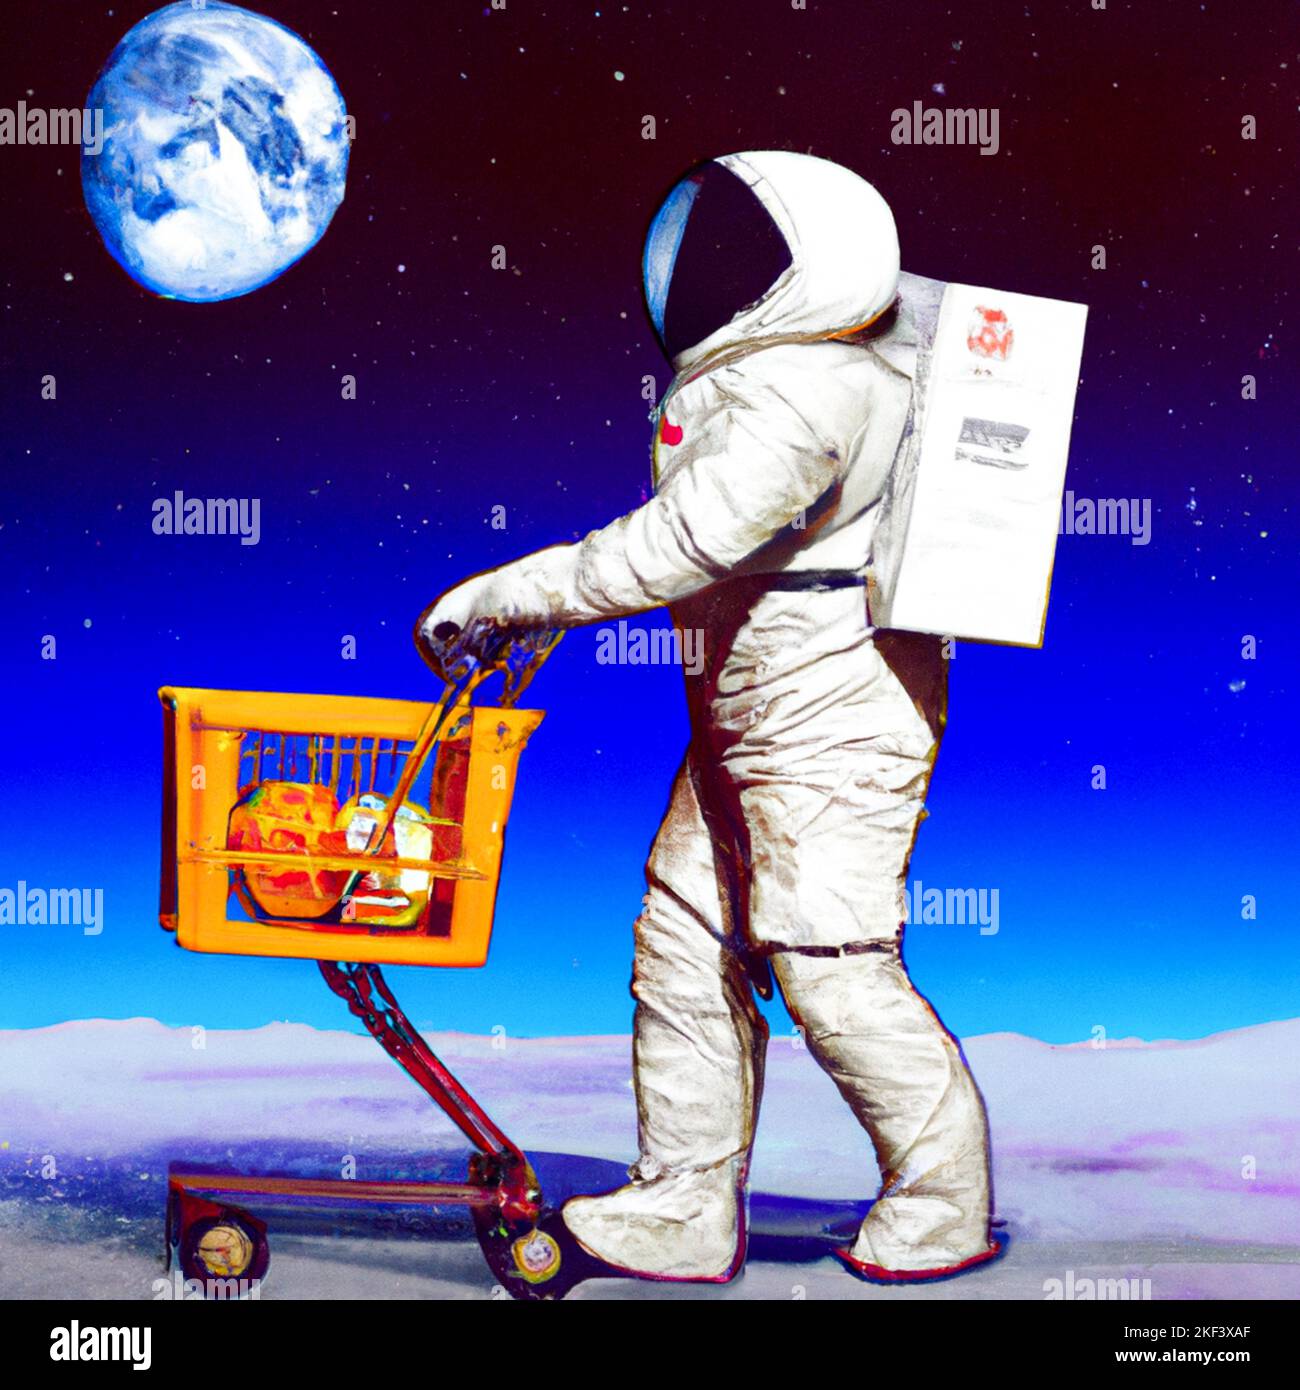 France, Paris on 2022-11-06. Digital illustration of an astronaut with a shopping cart on the moon to evoke the theme of rising prices and inflation b Stock Photo